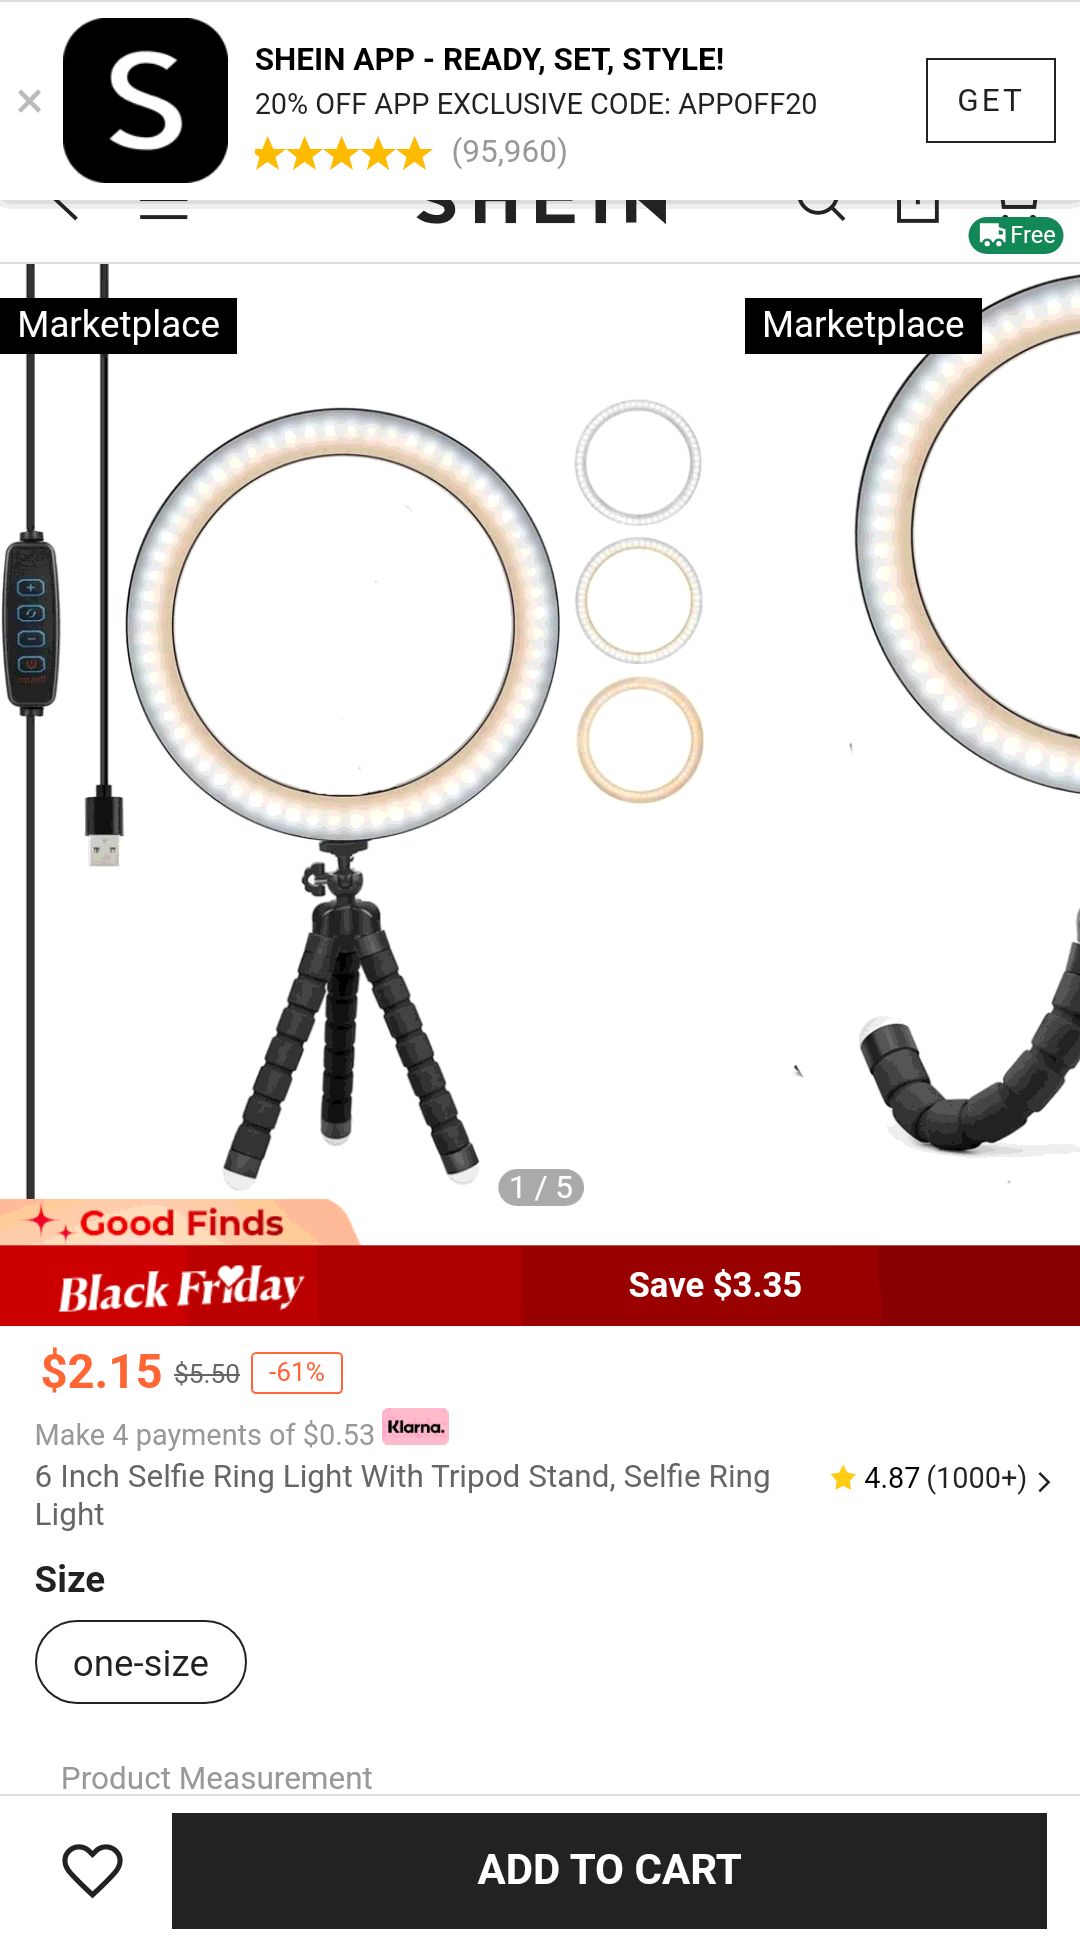 6 Inch Selfie Ring Light With Tripod Stand, Selfie Ring Light | SHEIN USA